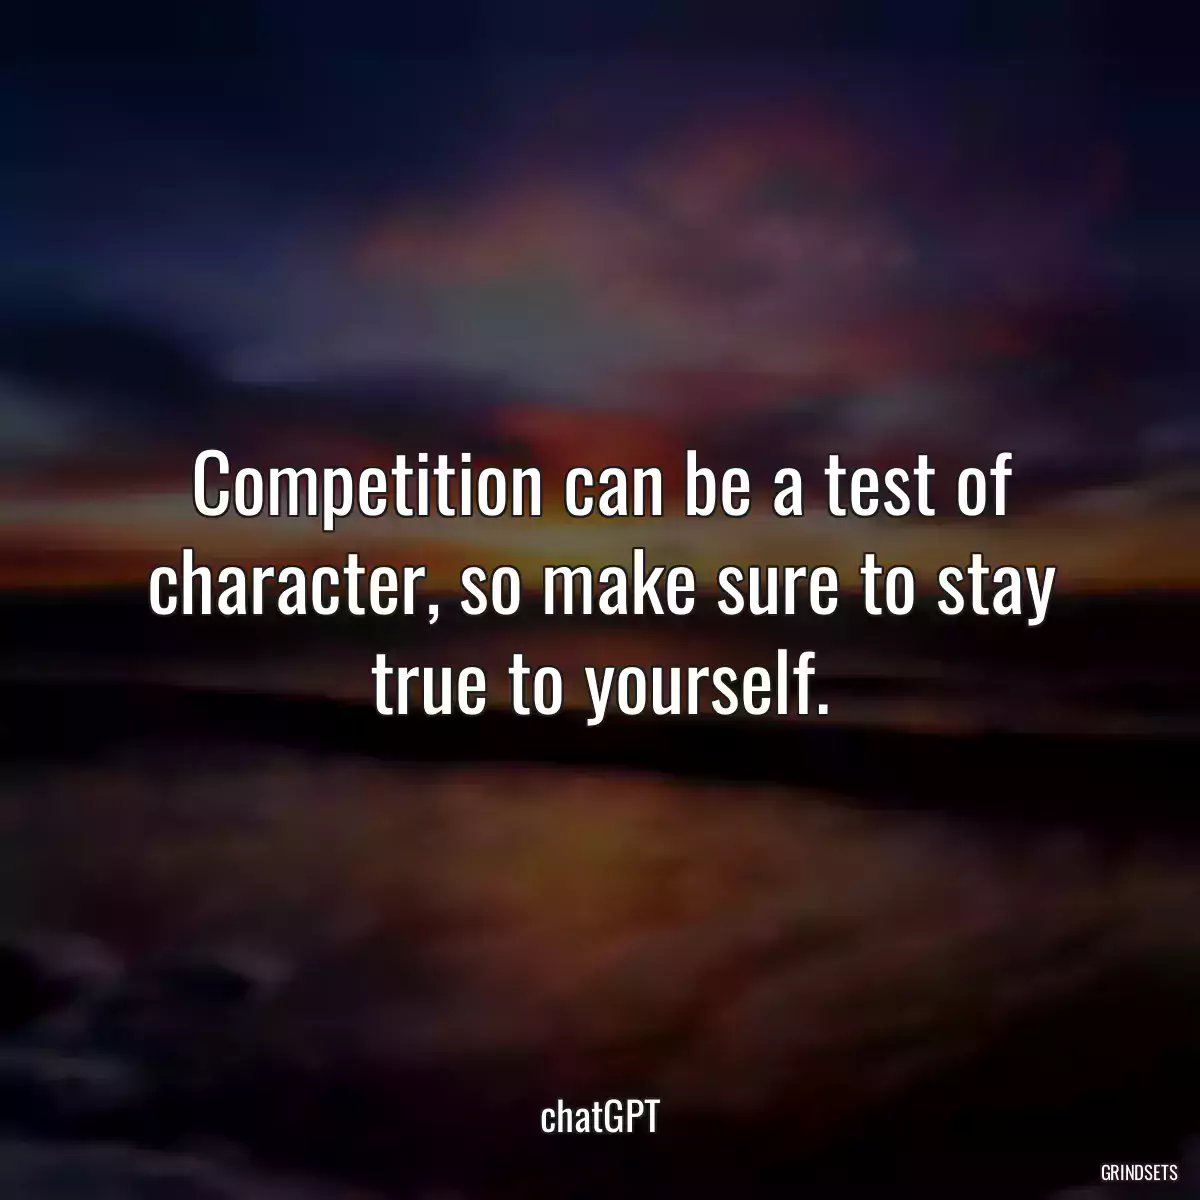 Competition can be a test of character, so make sure to stay true to yourself.